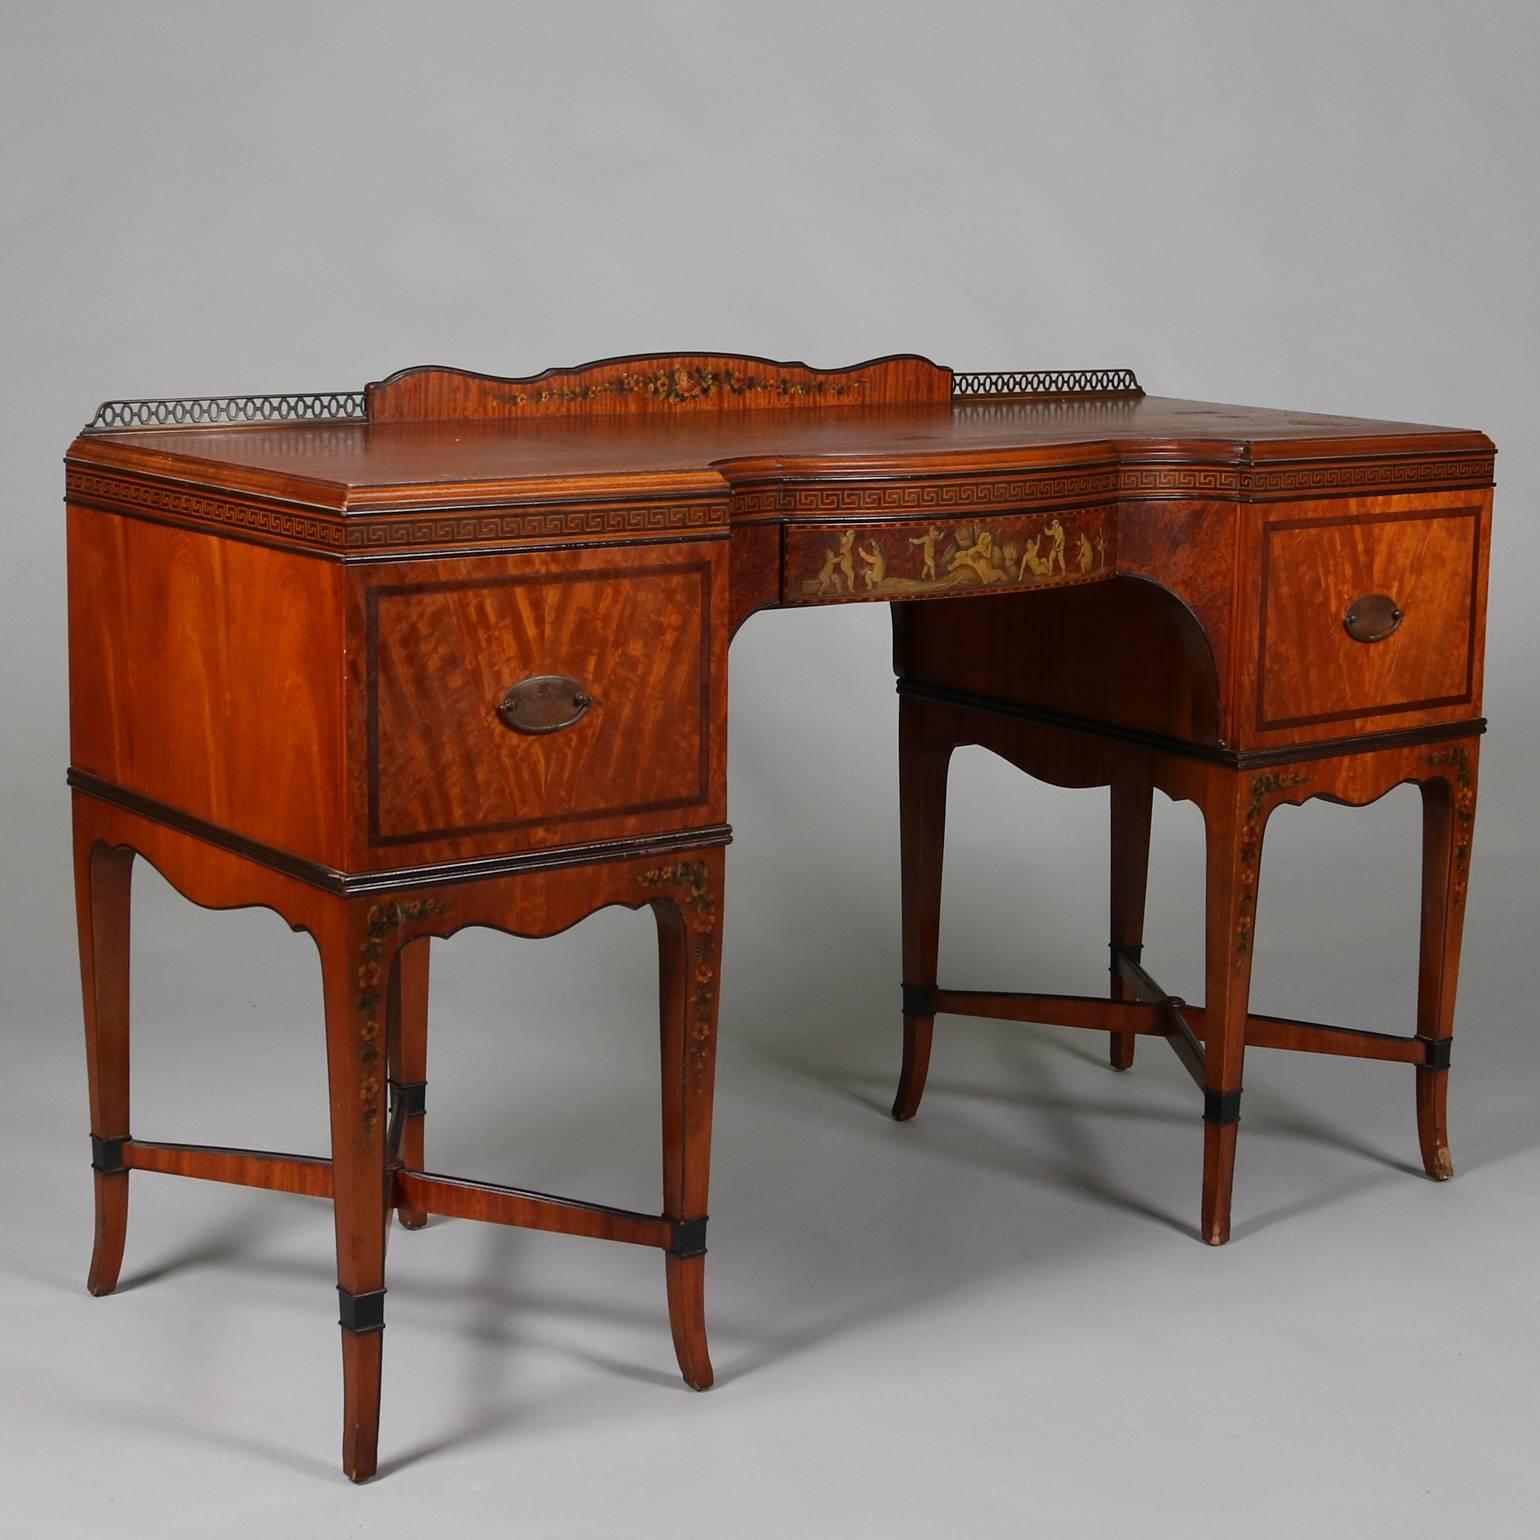 Antique fine Adam style satinwood mirrored dressing table features deep striations throughout with ebonized and inlaid Greek Key banding, accenting hand-painted floral sprays and central Classical cherubi scenes, bronze hardware, circa